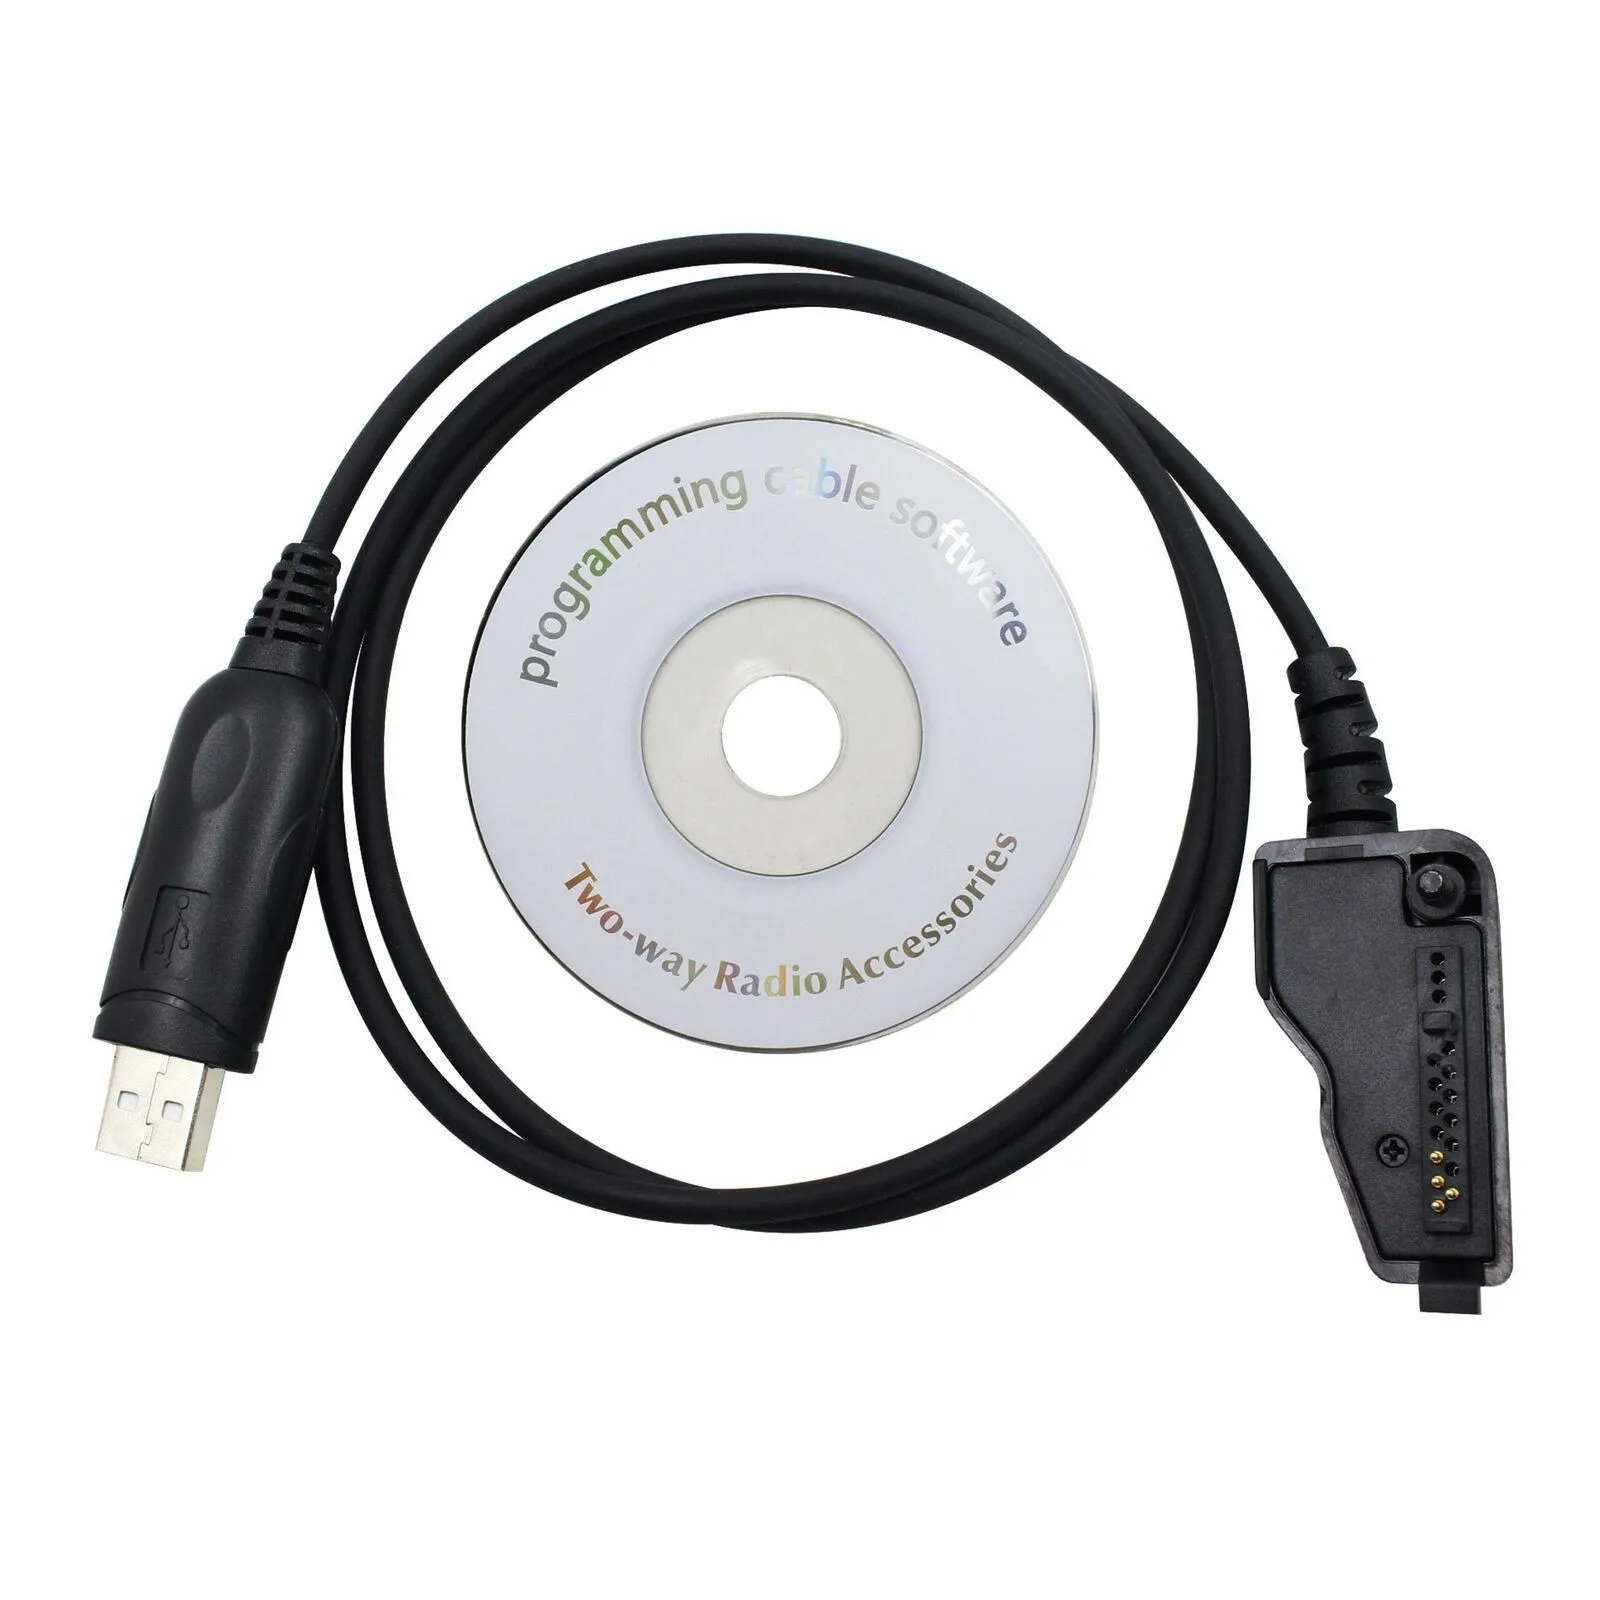 3.28ft 1m USB Programming Cable Cord +CD For Kenwood Radio TK-981 2140 2180 3140